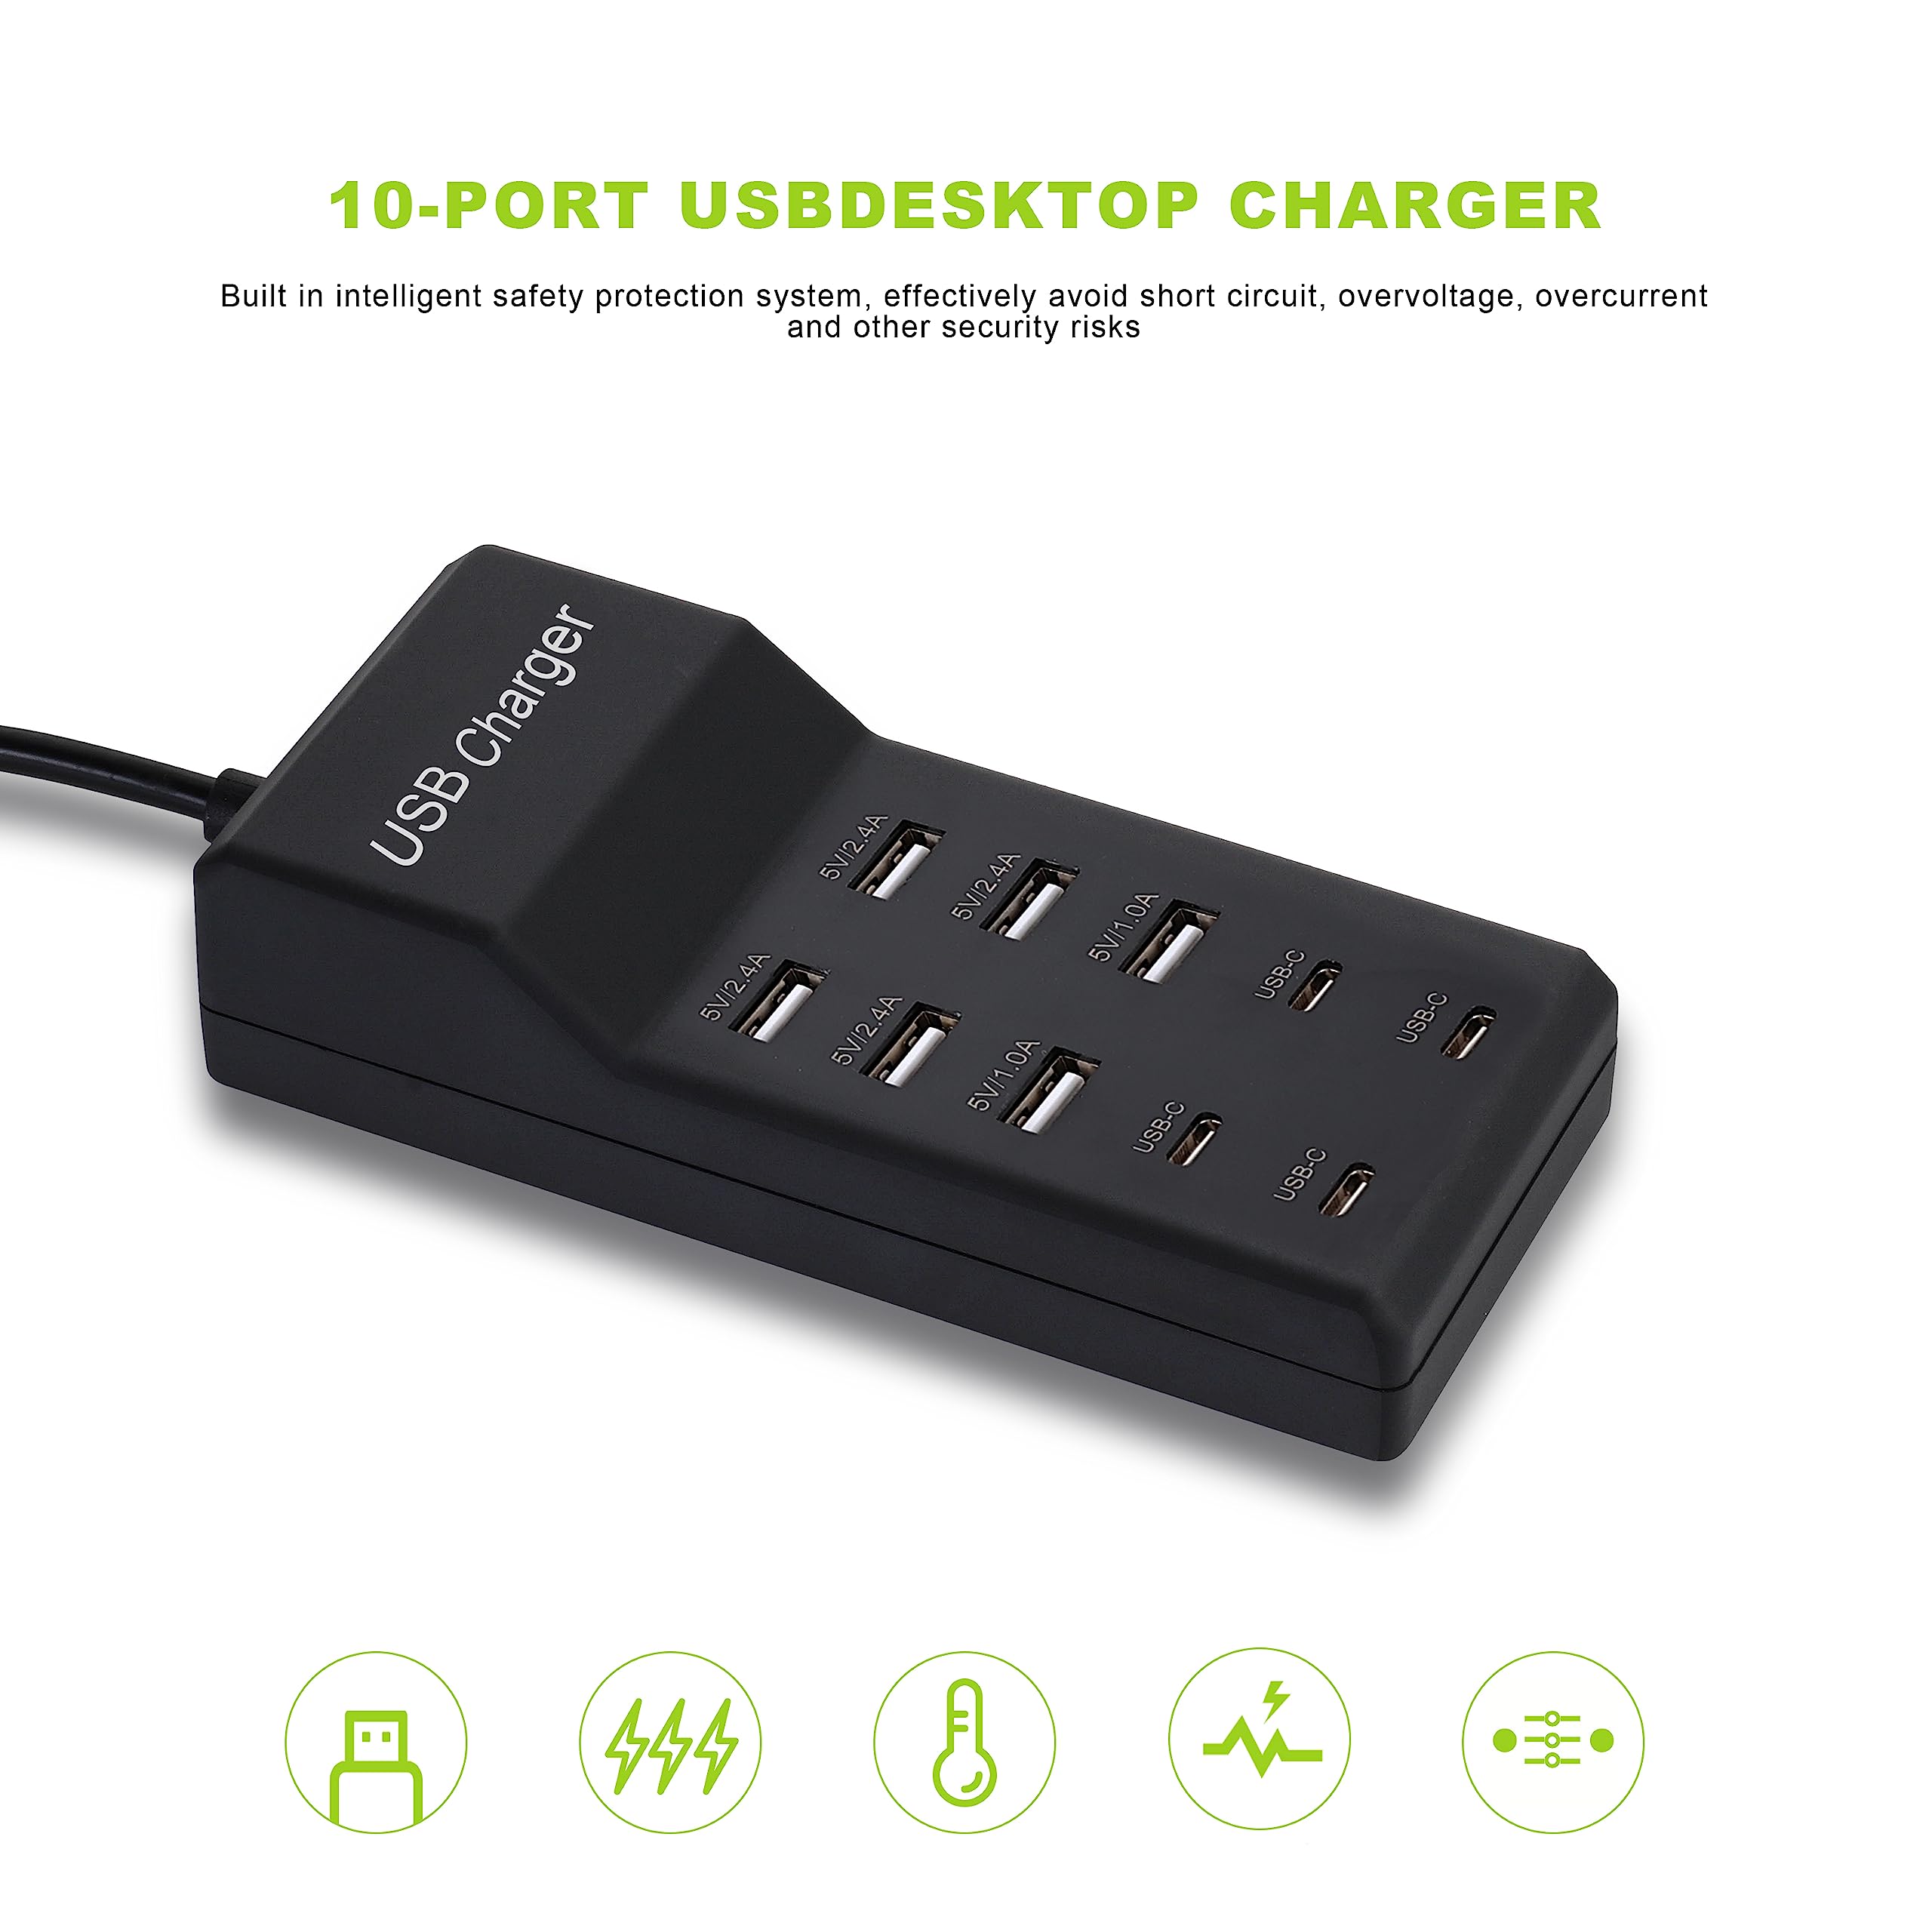 Wyssay USB Charger,5V 10A(50W) USB Charging Station with 10-Port (6 USB-A Port & 4 USB-C Port) Compatible with iPhone 14/13/12/11/X/8/7/6 Phones, Watch,Tablets, Smartphones Black